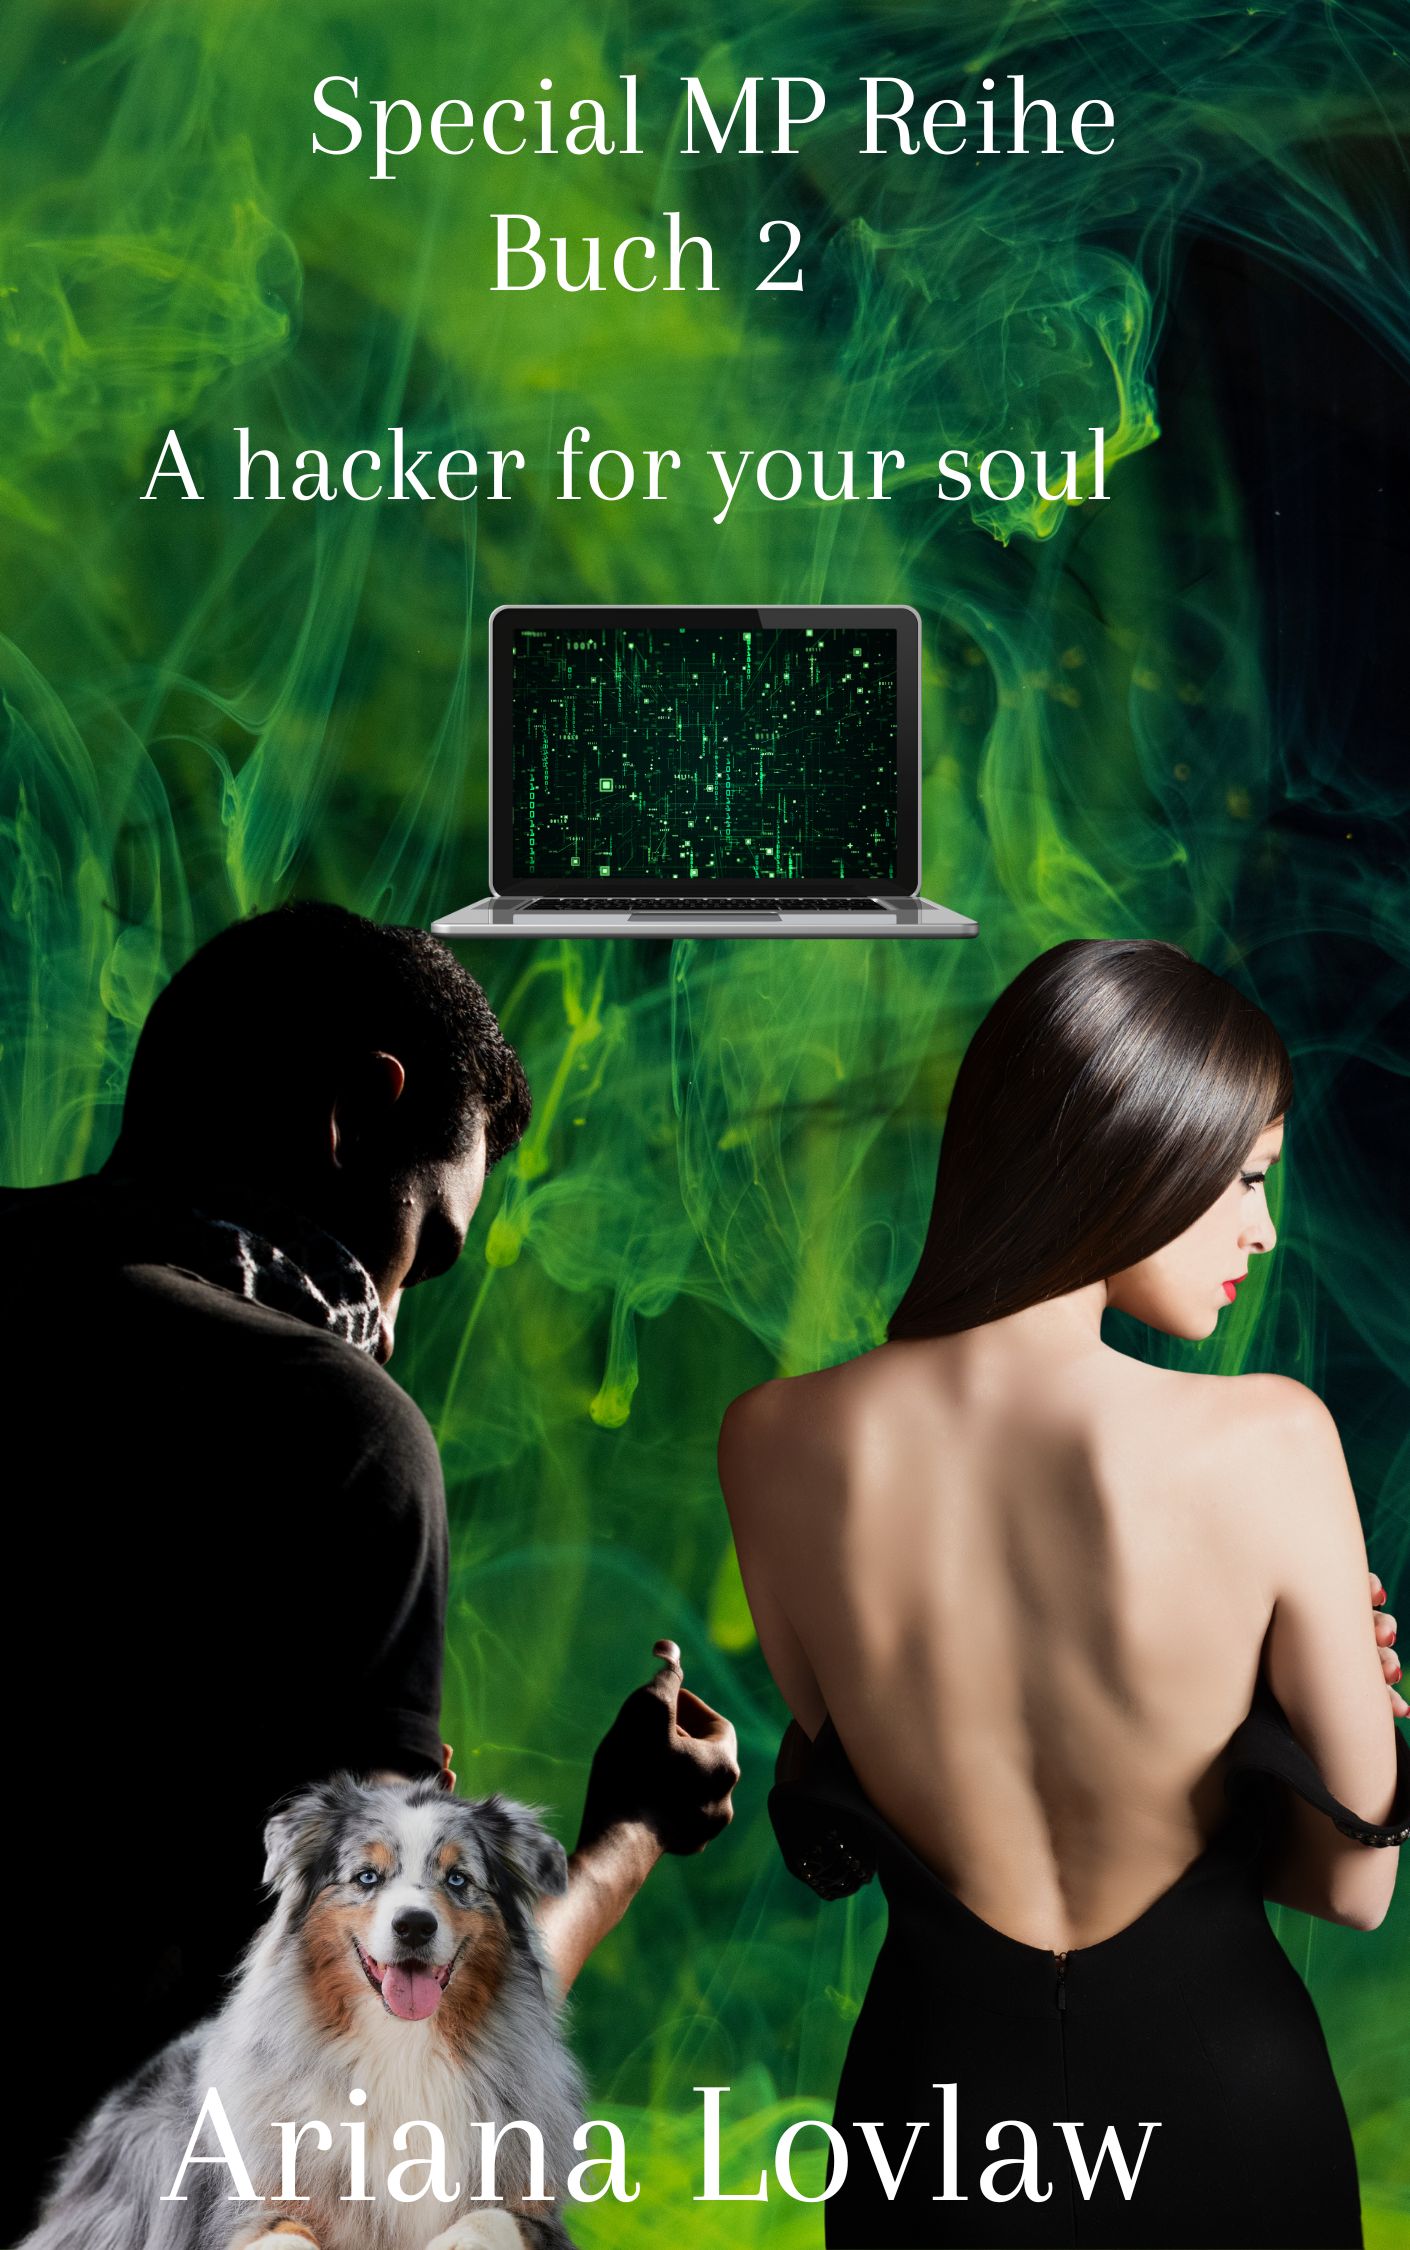 A hacker for your soul